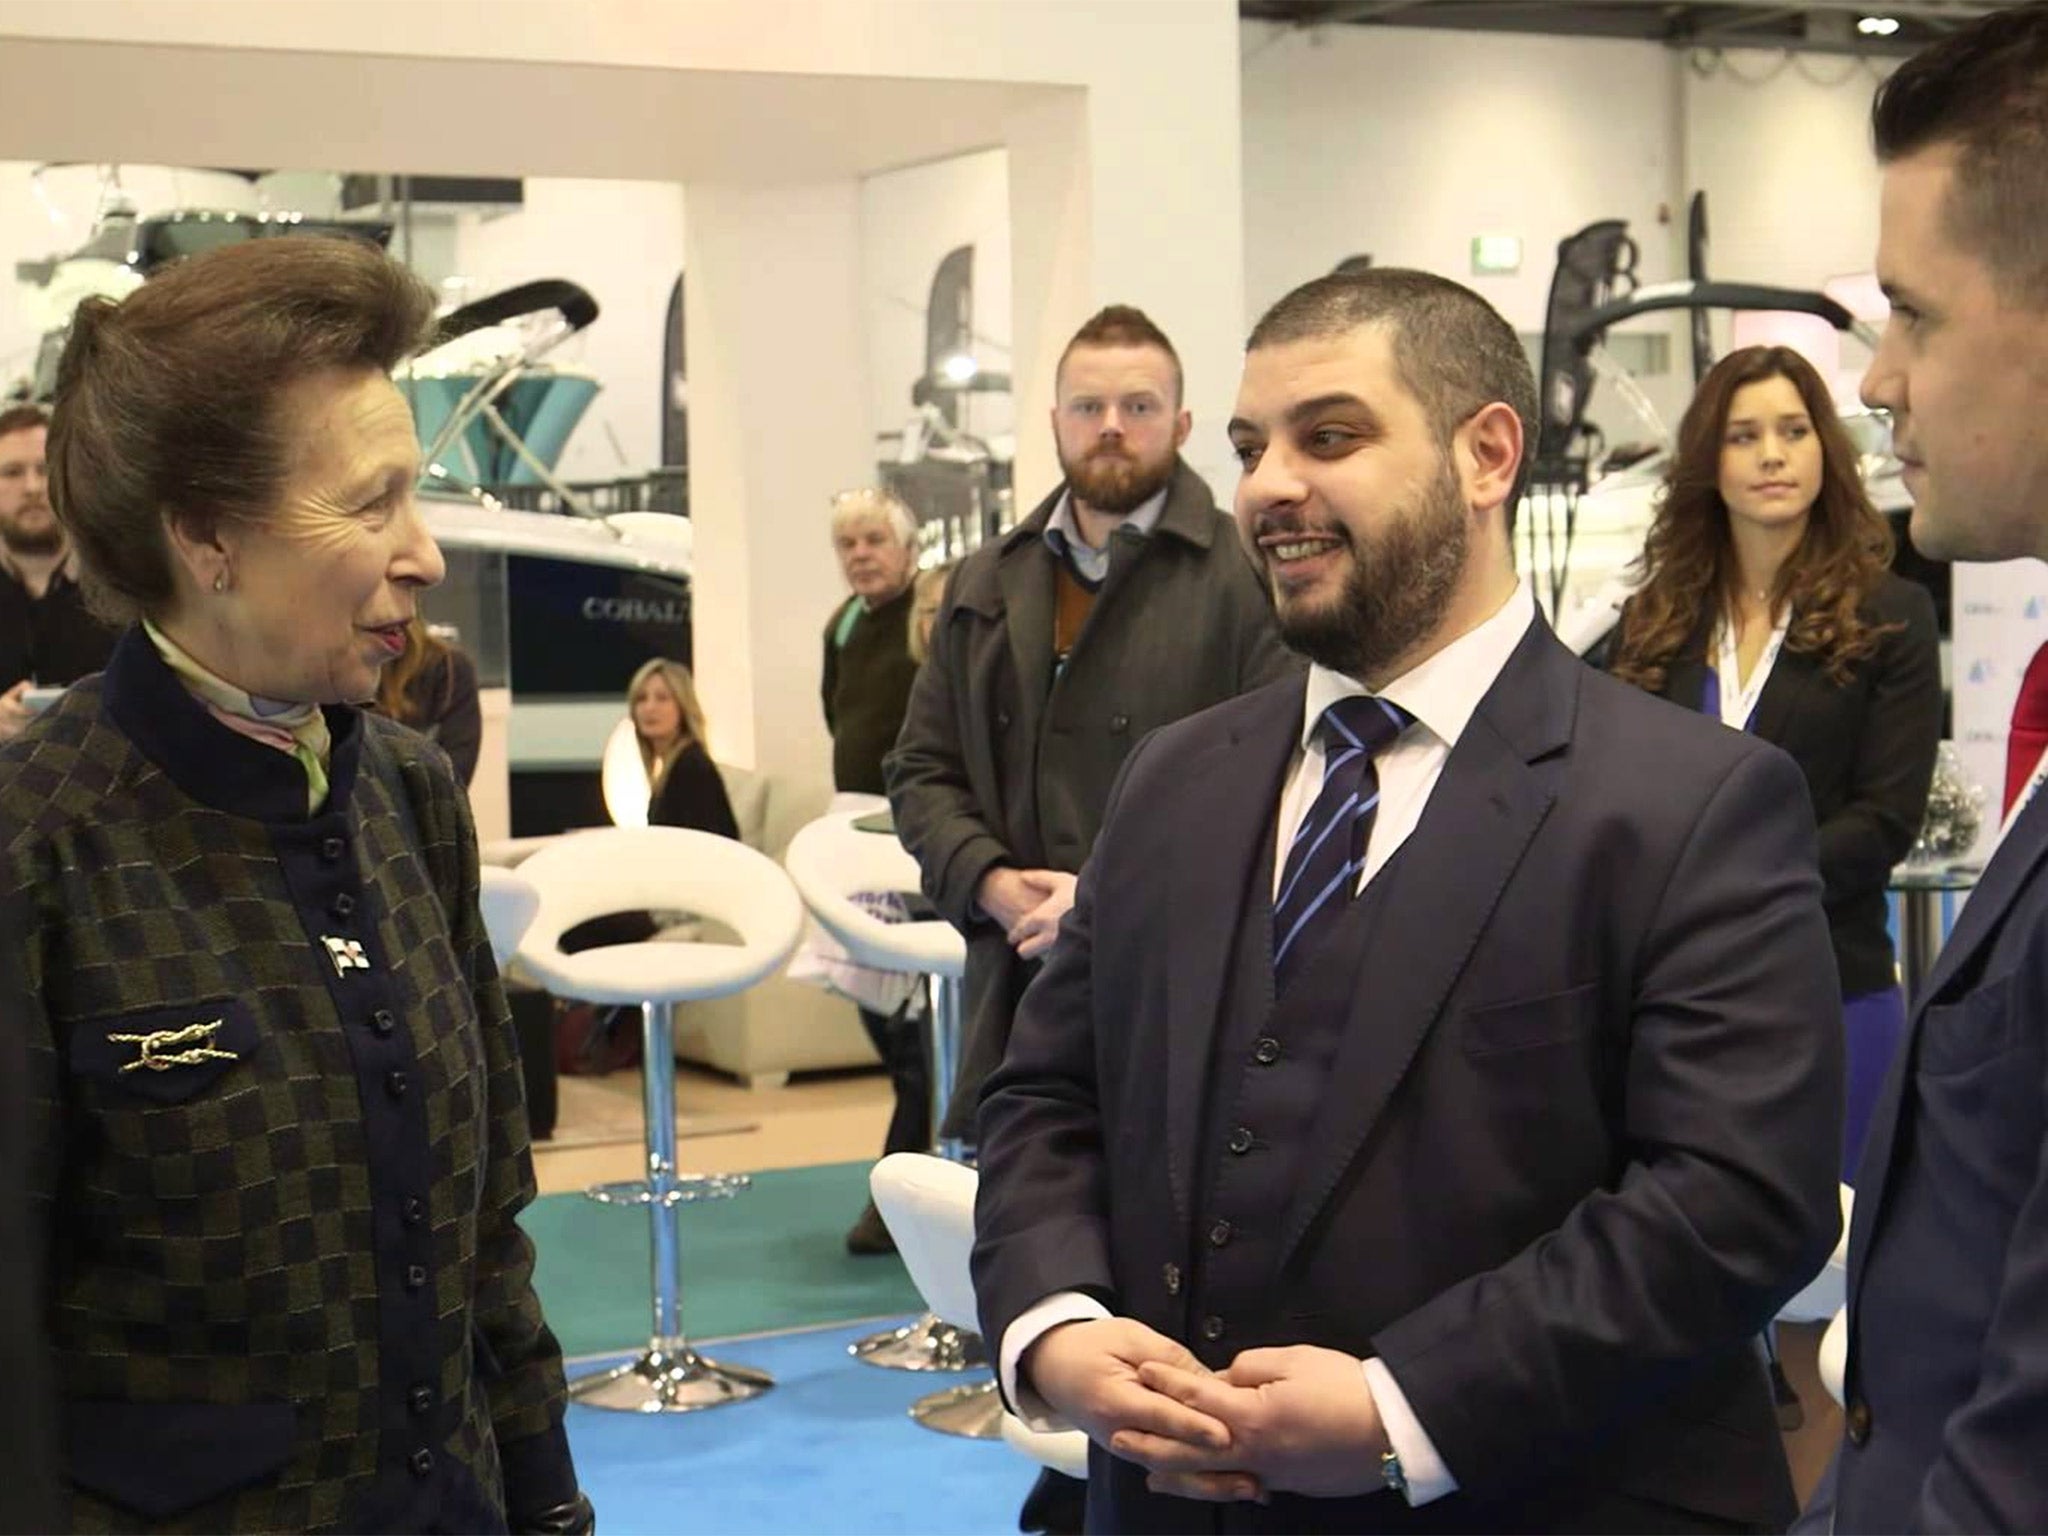 Princess Anne talks to Anthony Constantinou at the London Boat Show